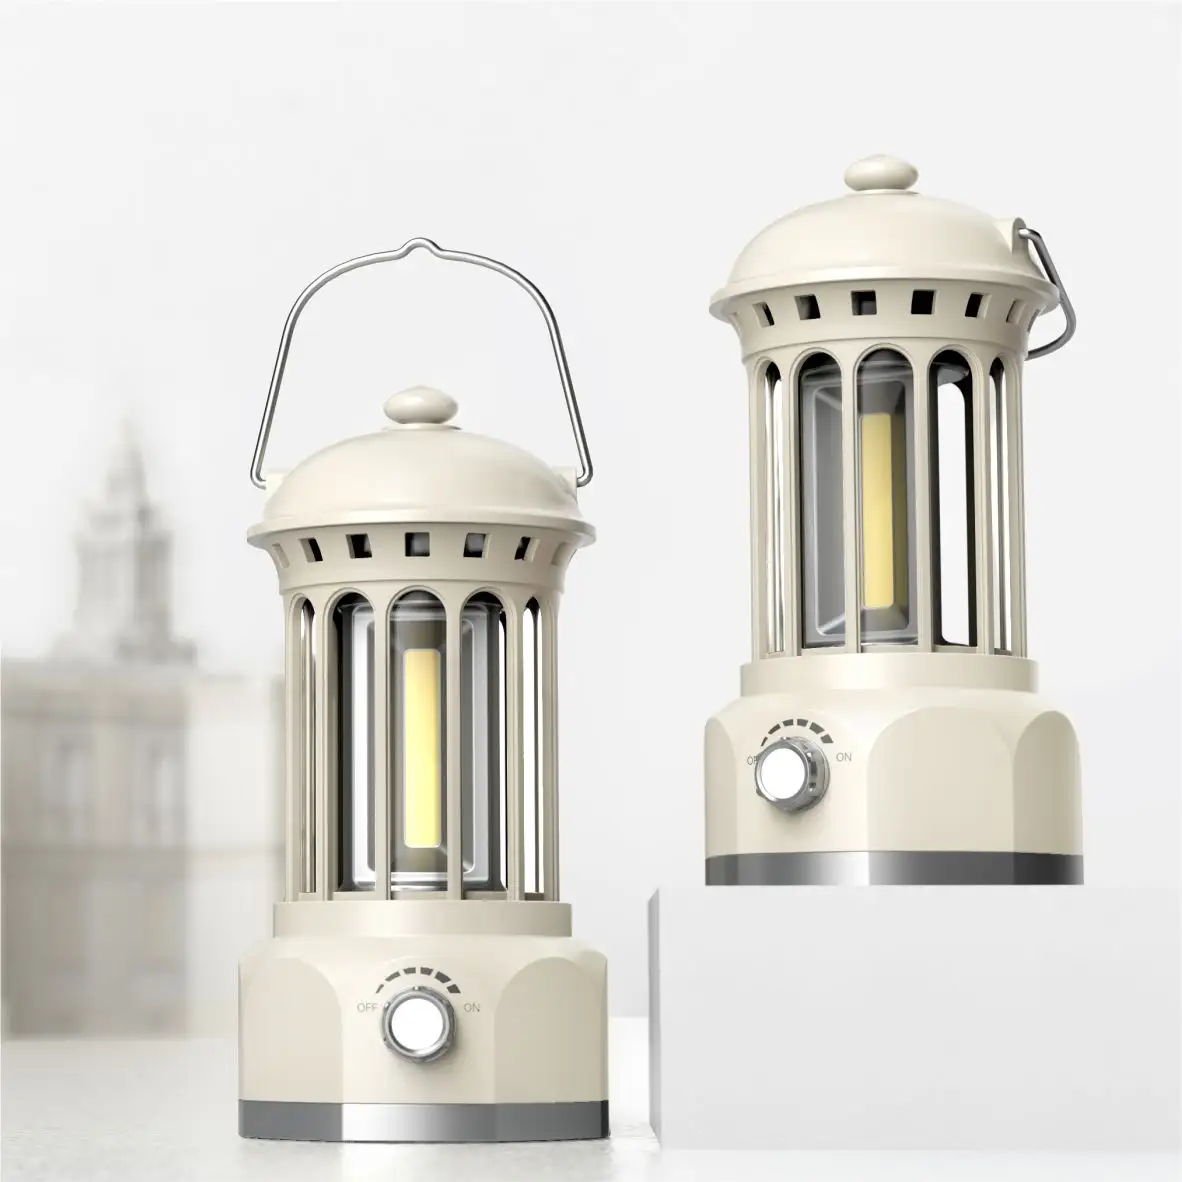 Rechargeable Camping Lantern Retro LED Camping Light Vintage Outdoor Portable Tent Camping Lantern Light